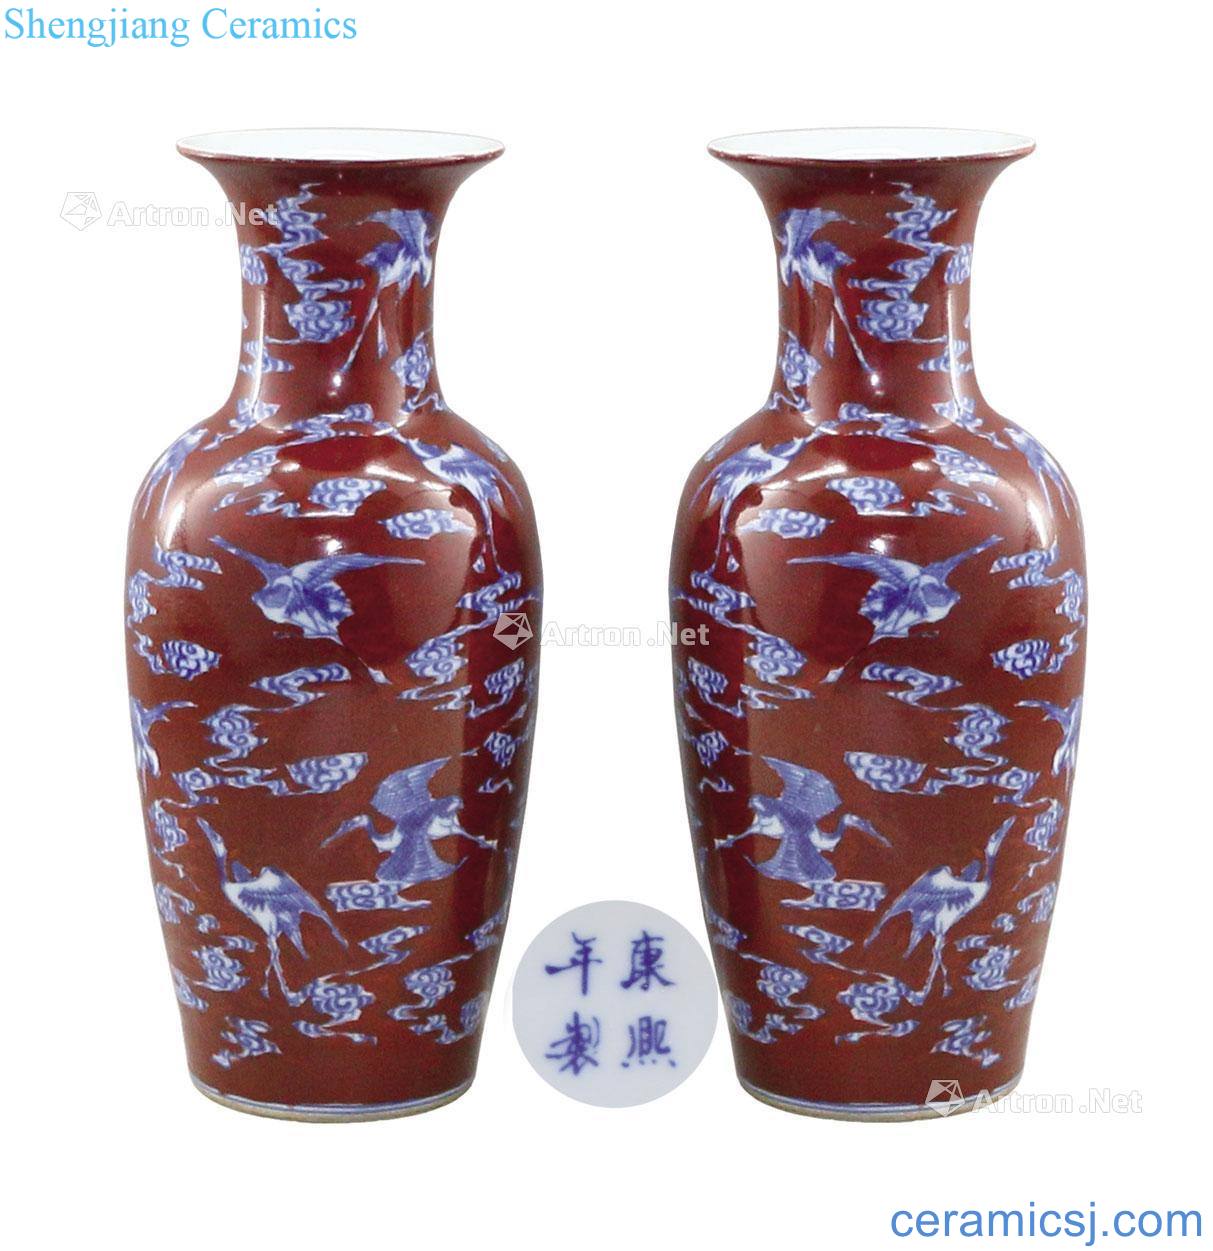 Purple, blue and white James t. c. na was published grain goddess of mercy bottle